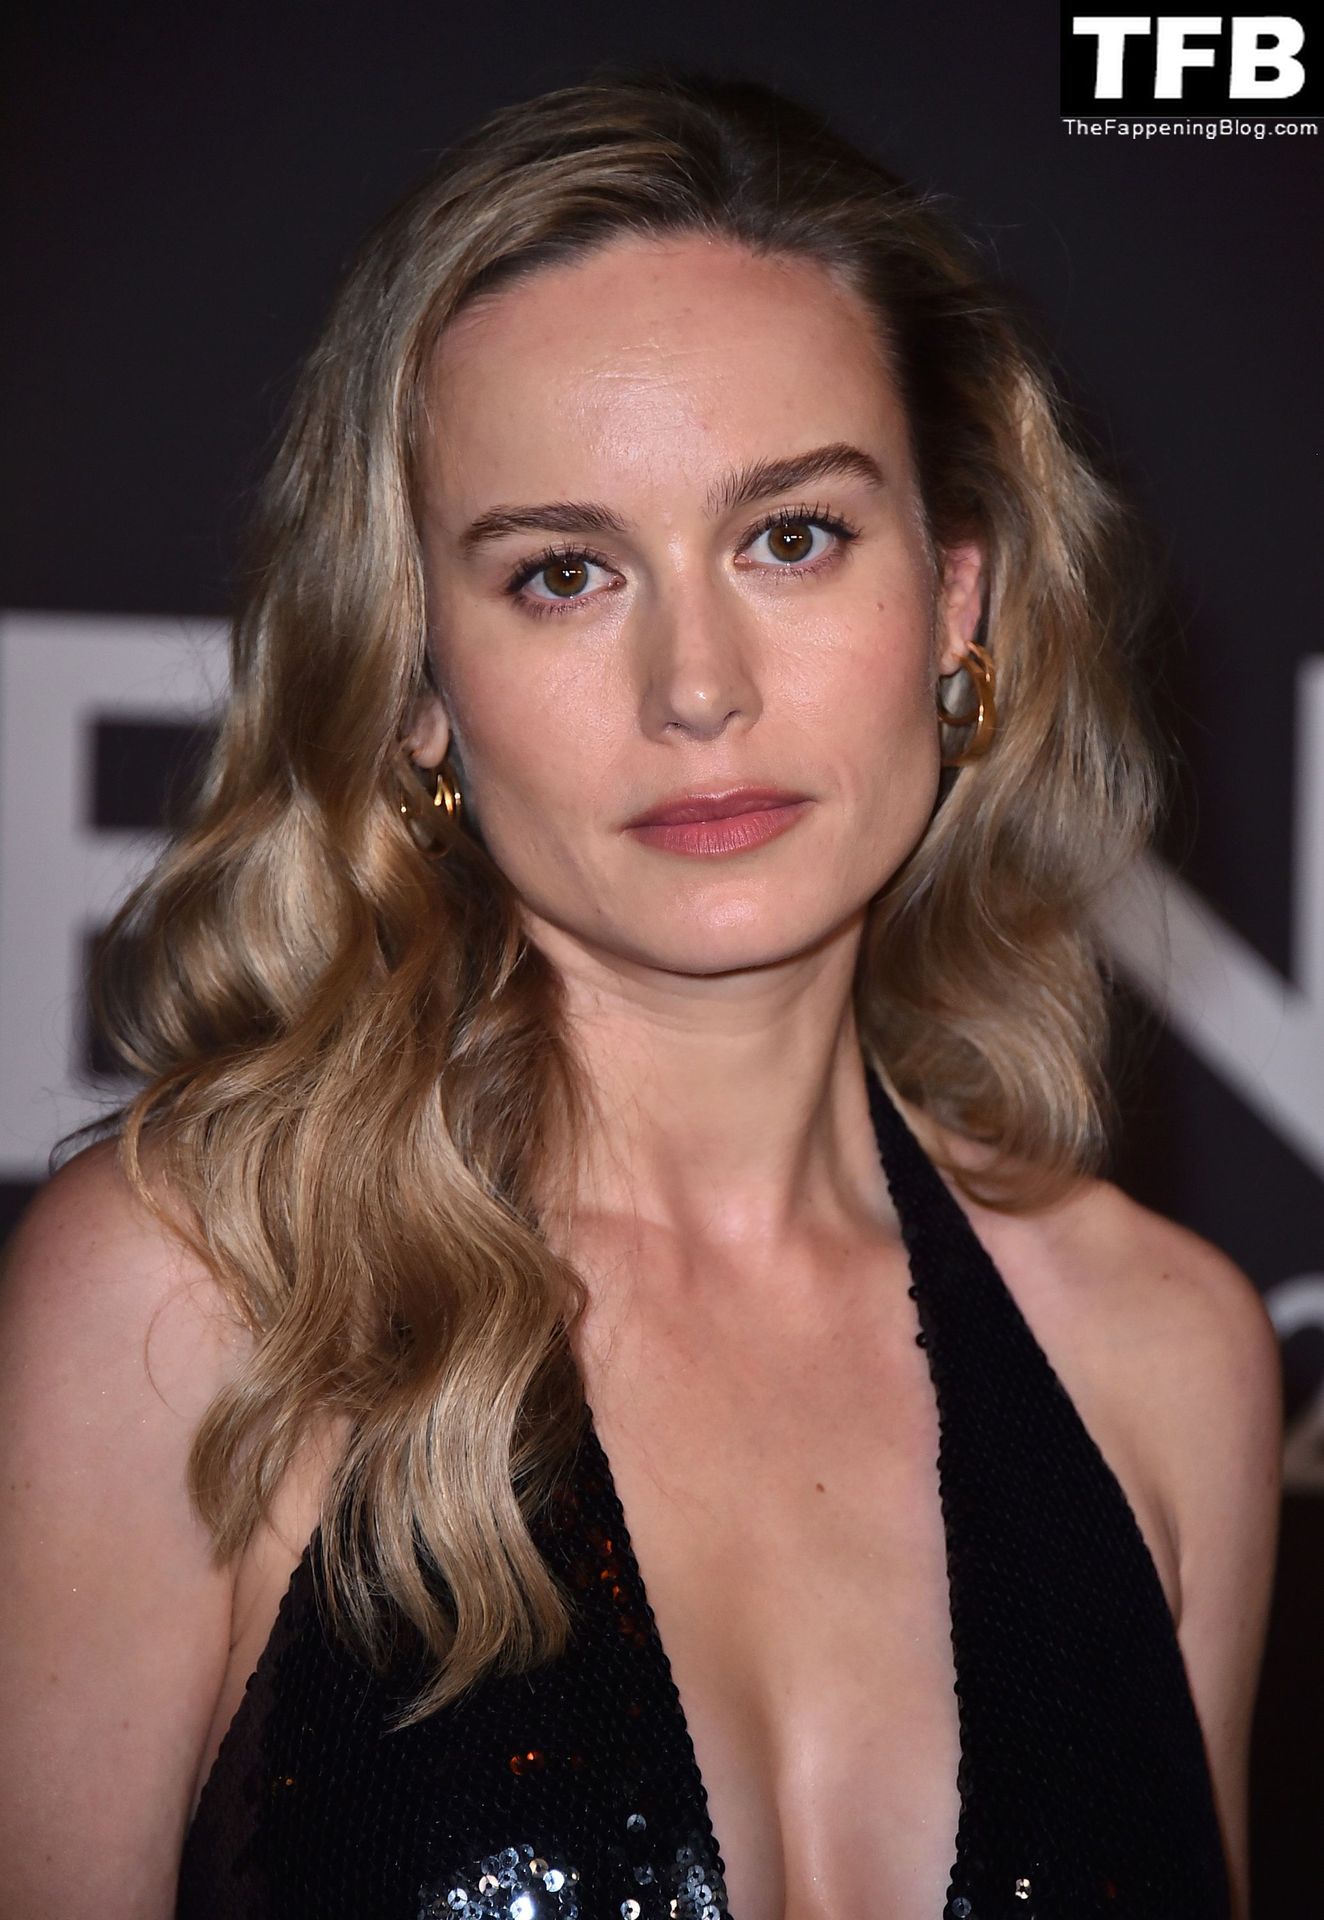 Brie Larson Displays Her Cleavage At The Celine Fall Winter Fashion Show Photos